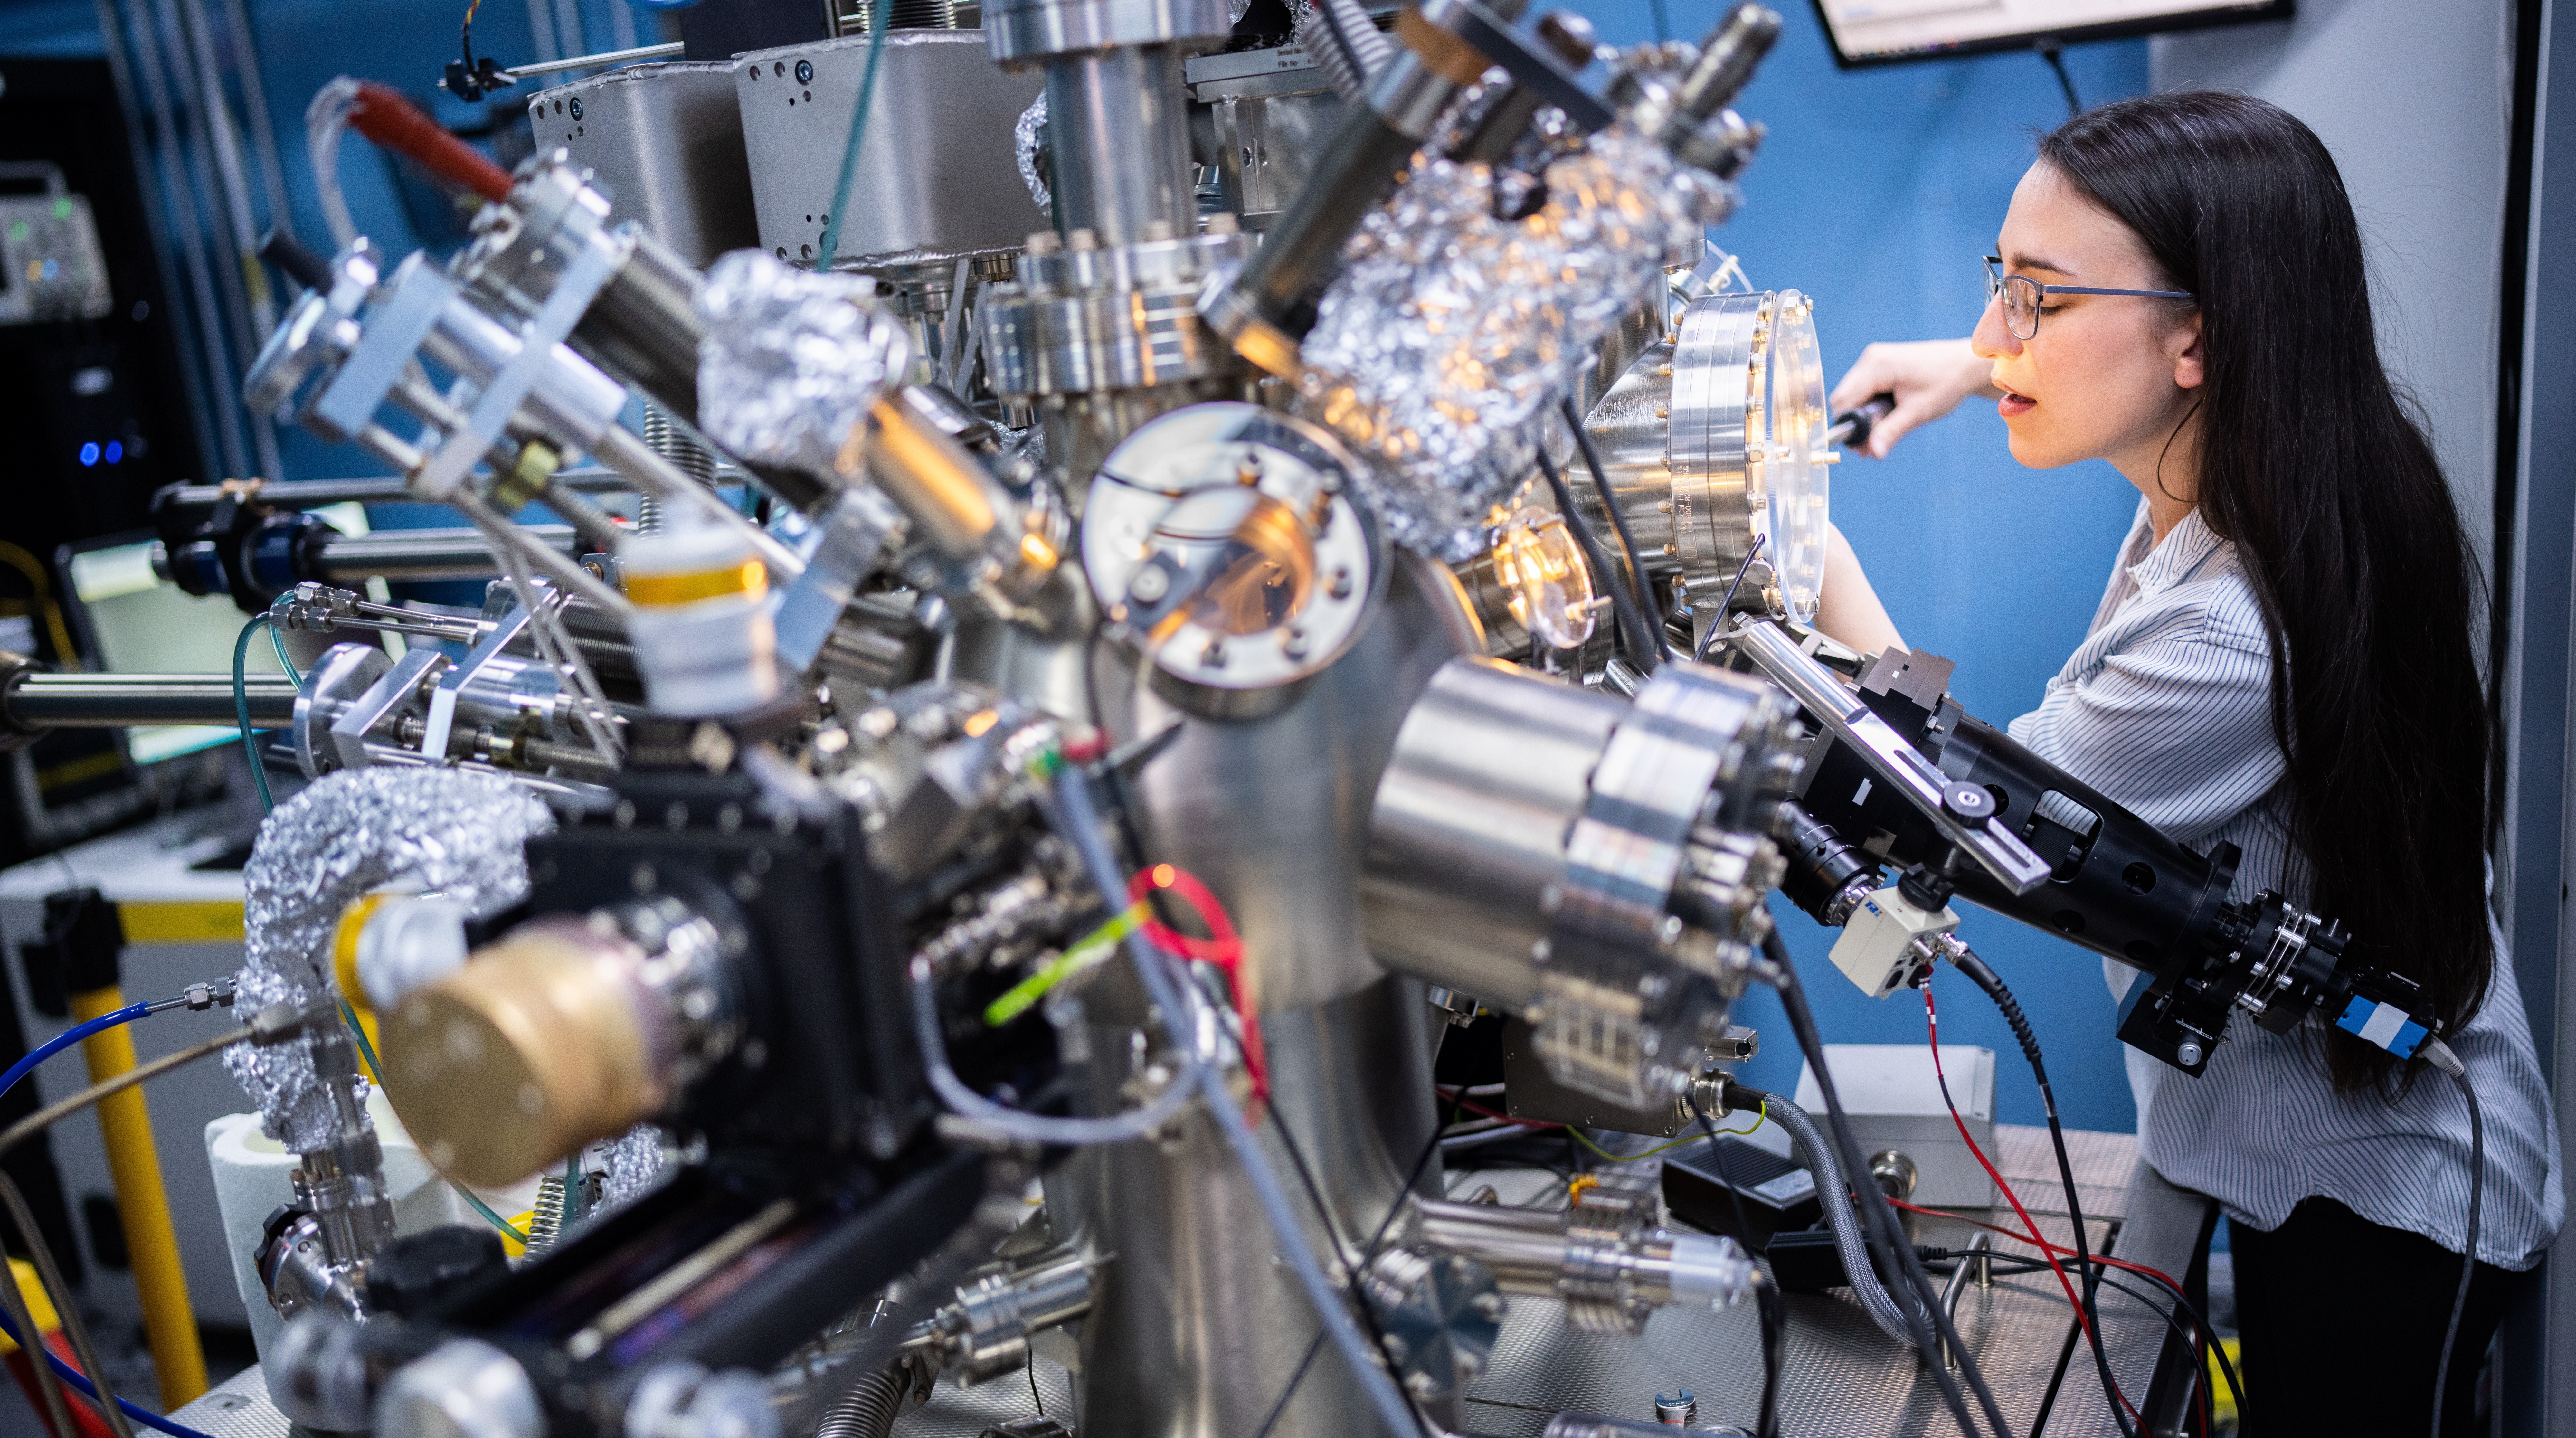 Out of the desert, a quantum powerhouse rises